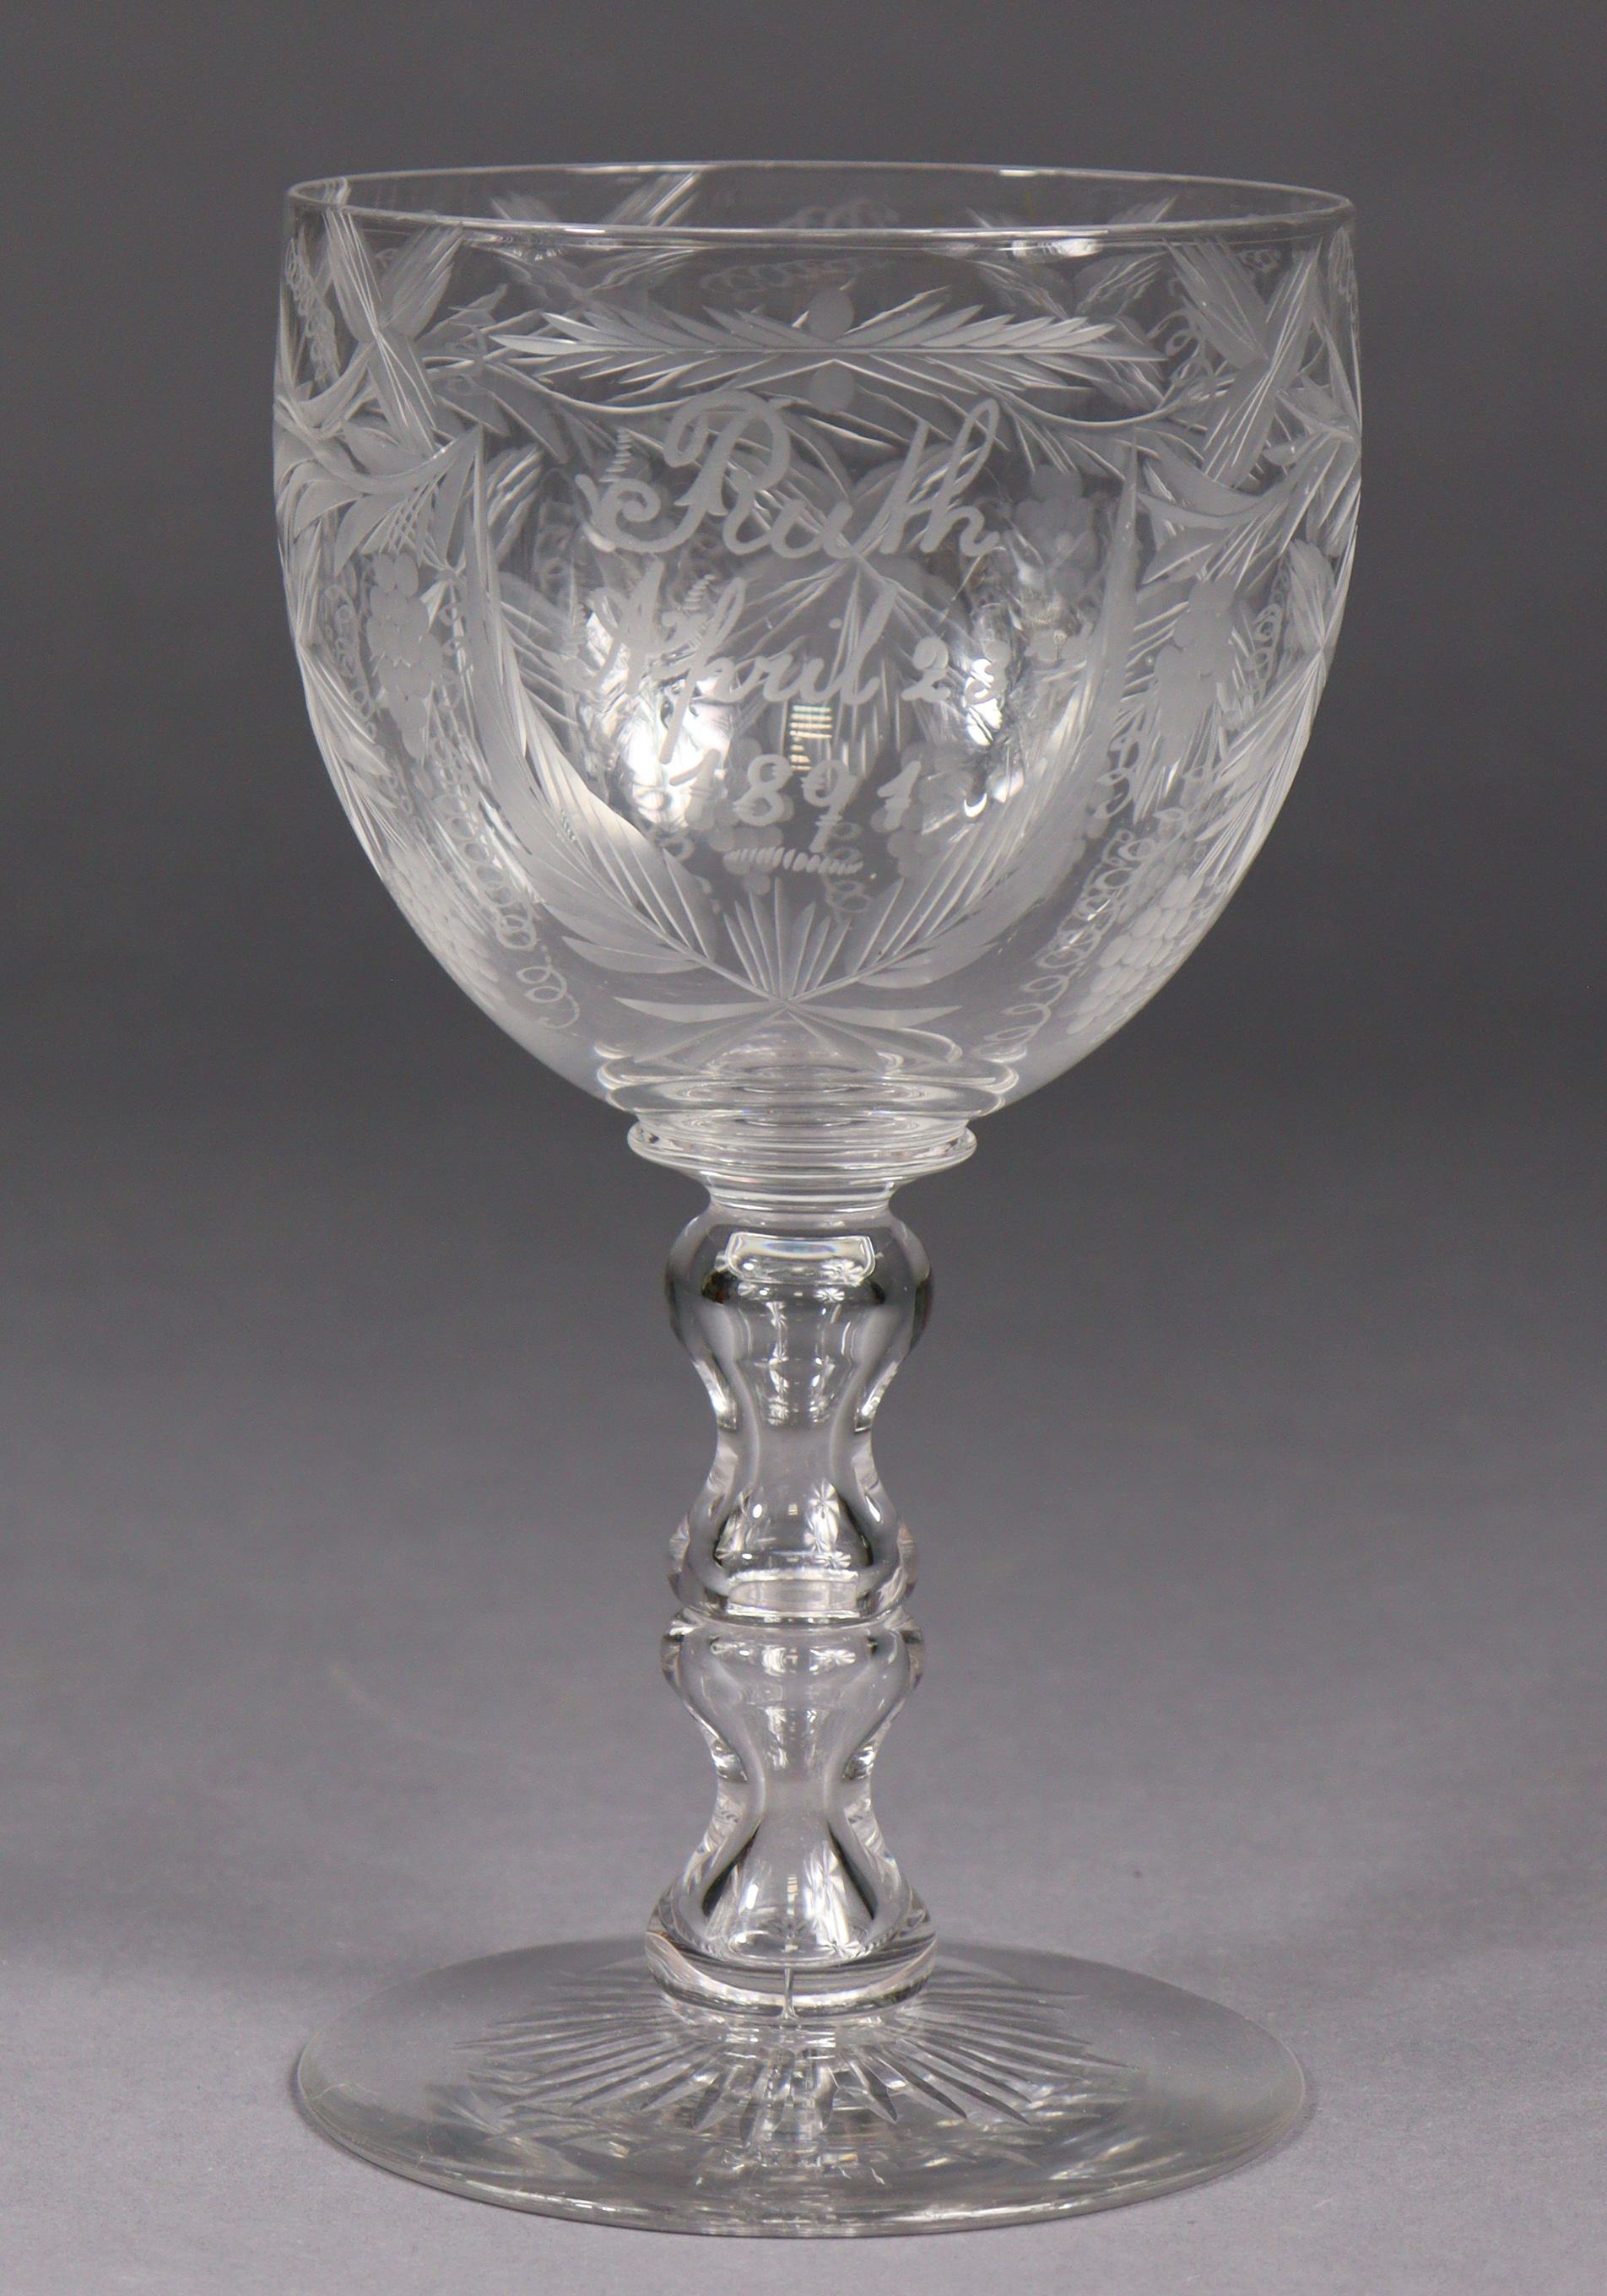 A late 19th century engraved glass large goblet, commemorating the 21st birthday of “Ruth, April 23